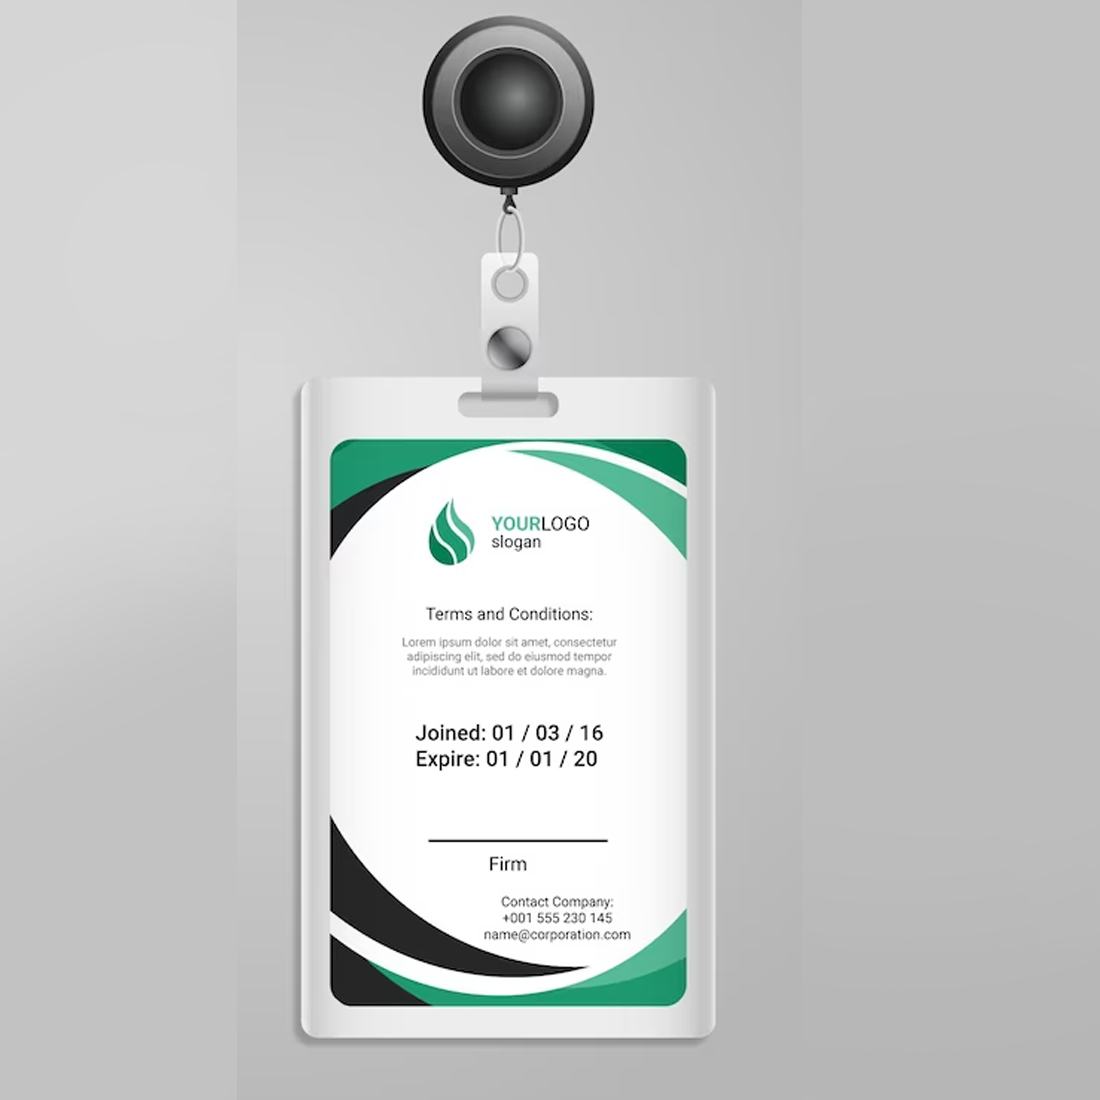 Archive abstract-design-id-cards-template preview image.